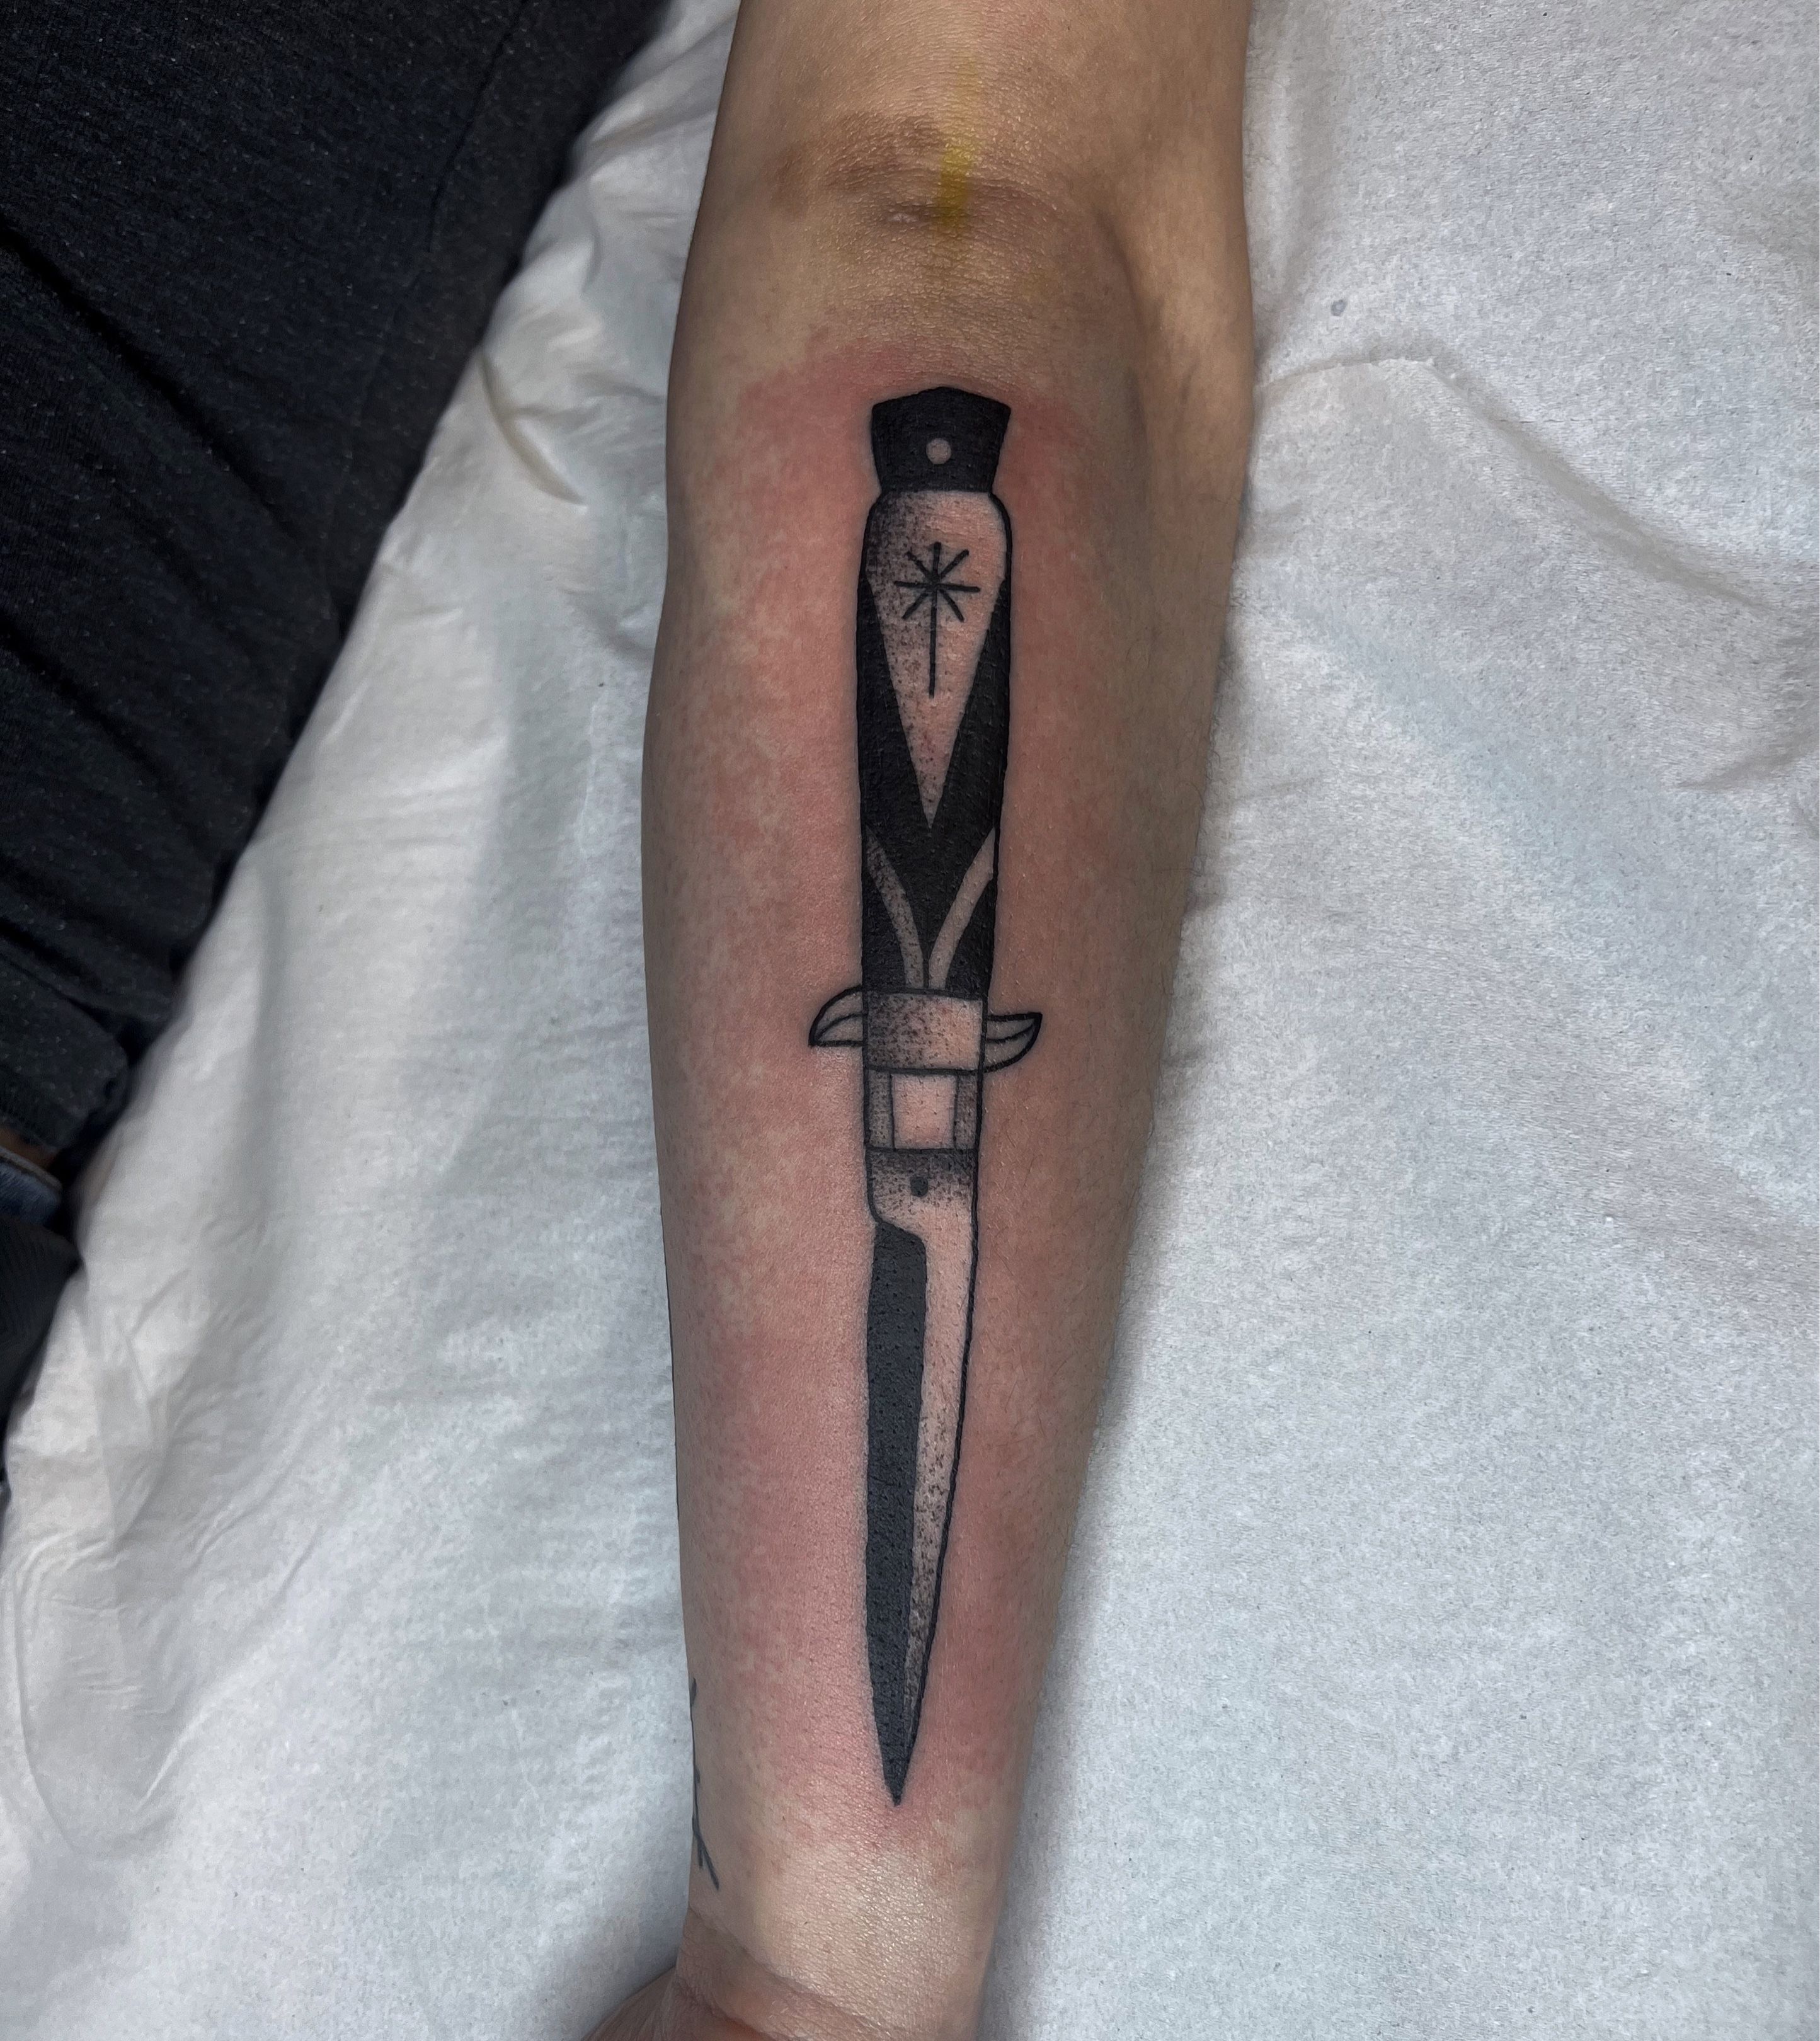 Razor tattoos and their meaning | Tattooing